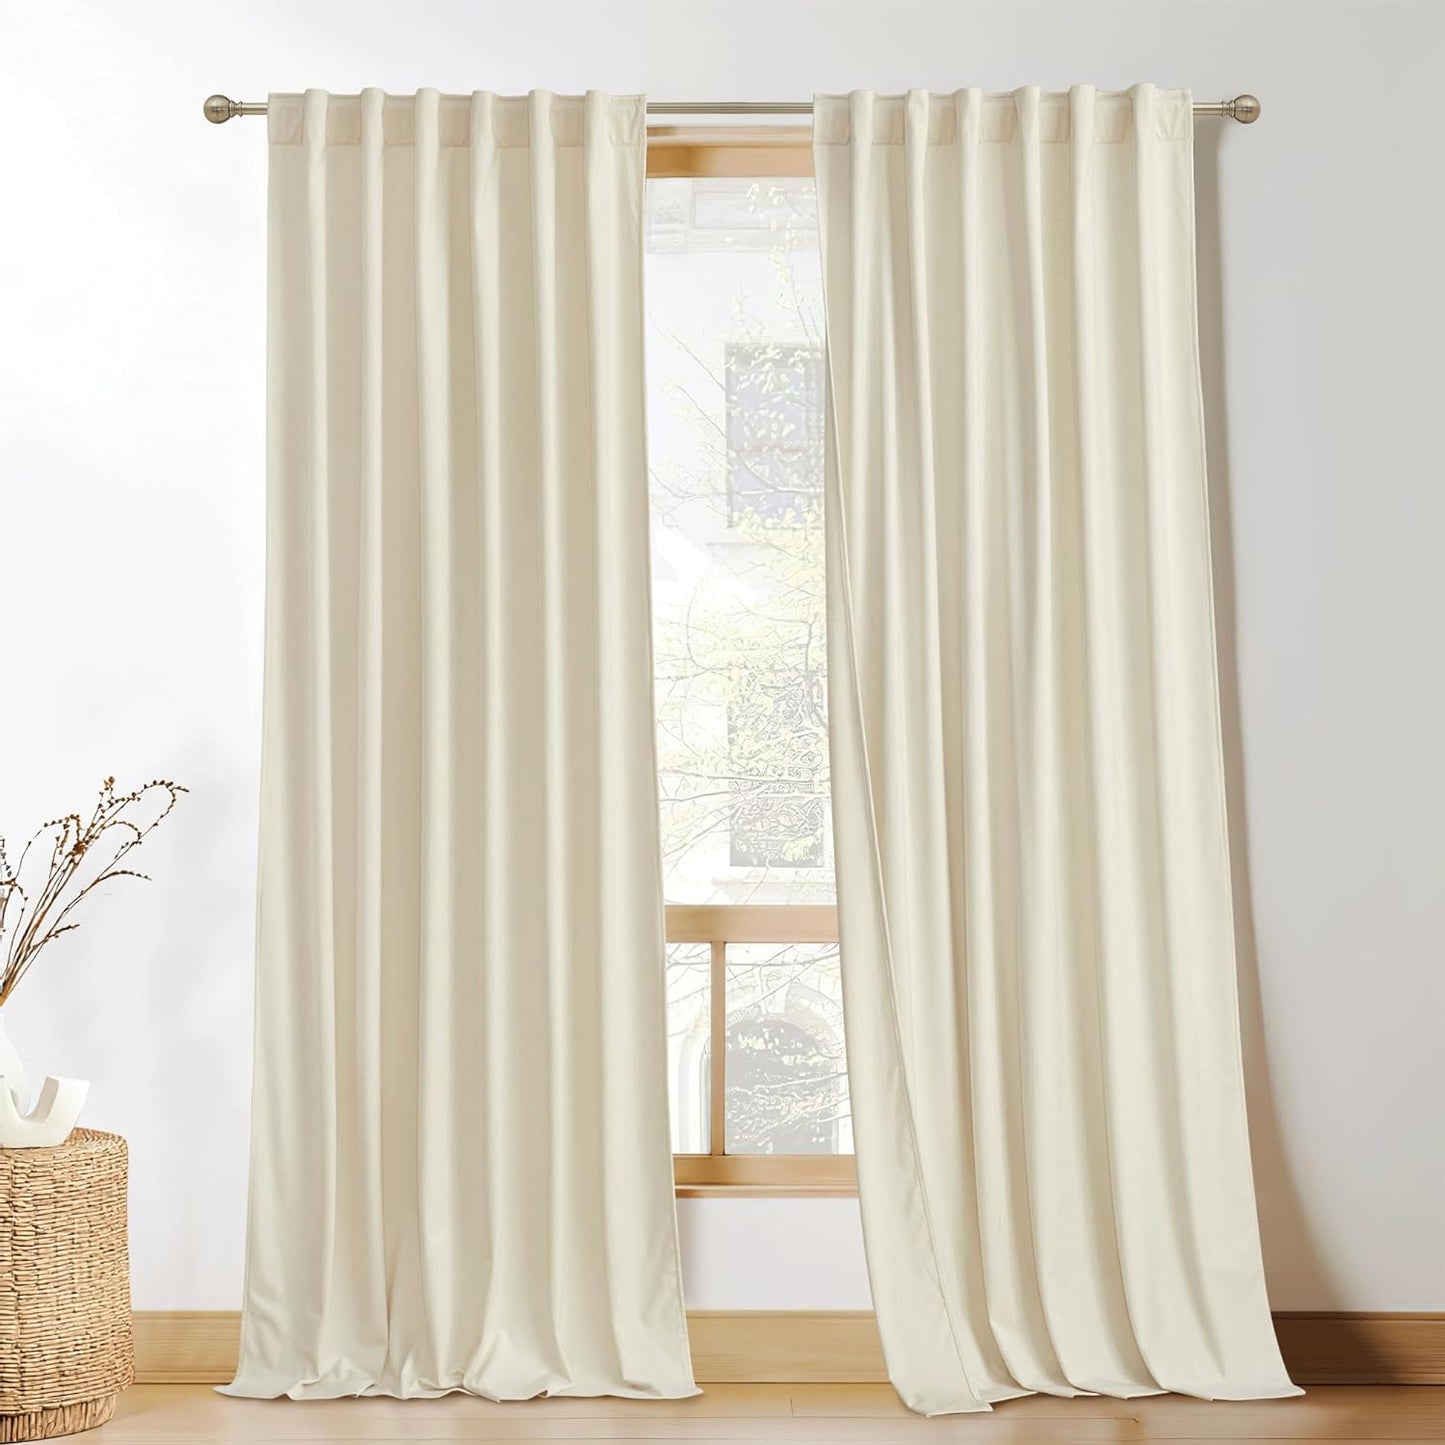 KGORGE Green Velvet Curtains 84 Inches Super Soft Room Darkening Thermal Insulating Window Curtains & Drapes for Bedroom Living Room Backdrop Holiday Christmas Decor, Hunter Green, W 52 X L 84, 2 Pcs  KGORGE Beige W 52 X L 96 